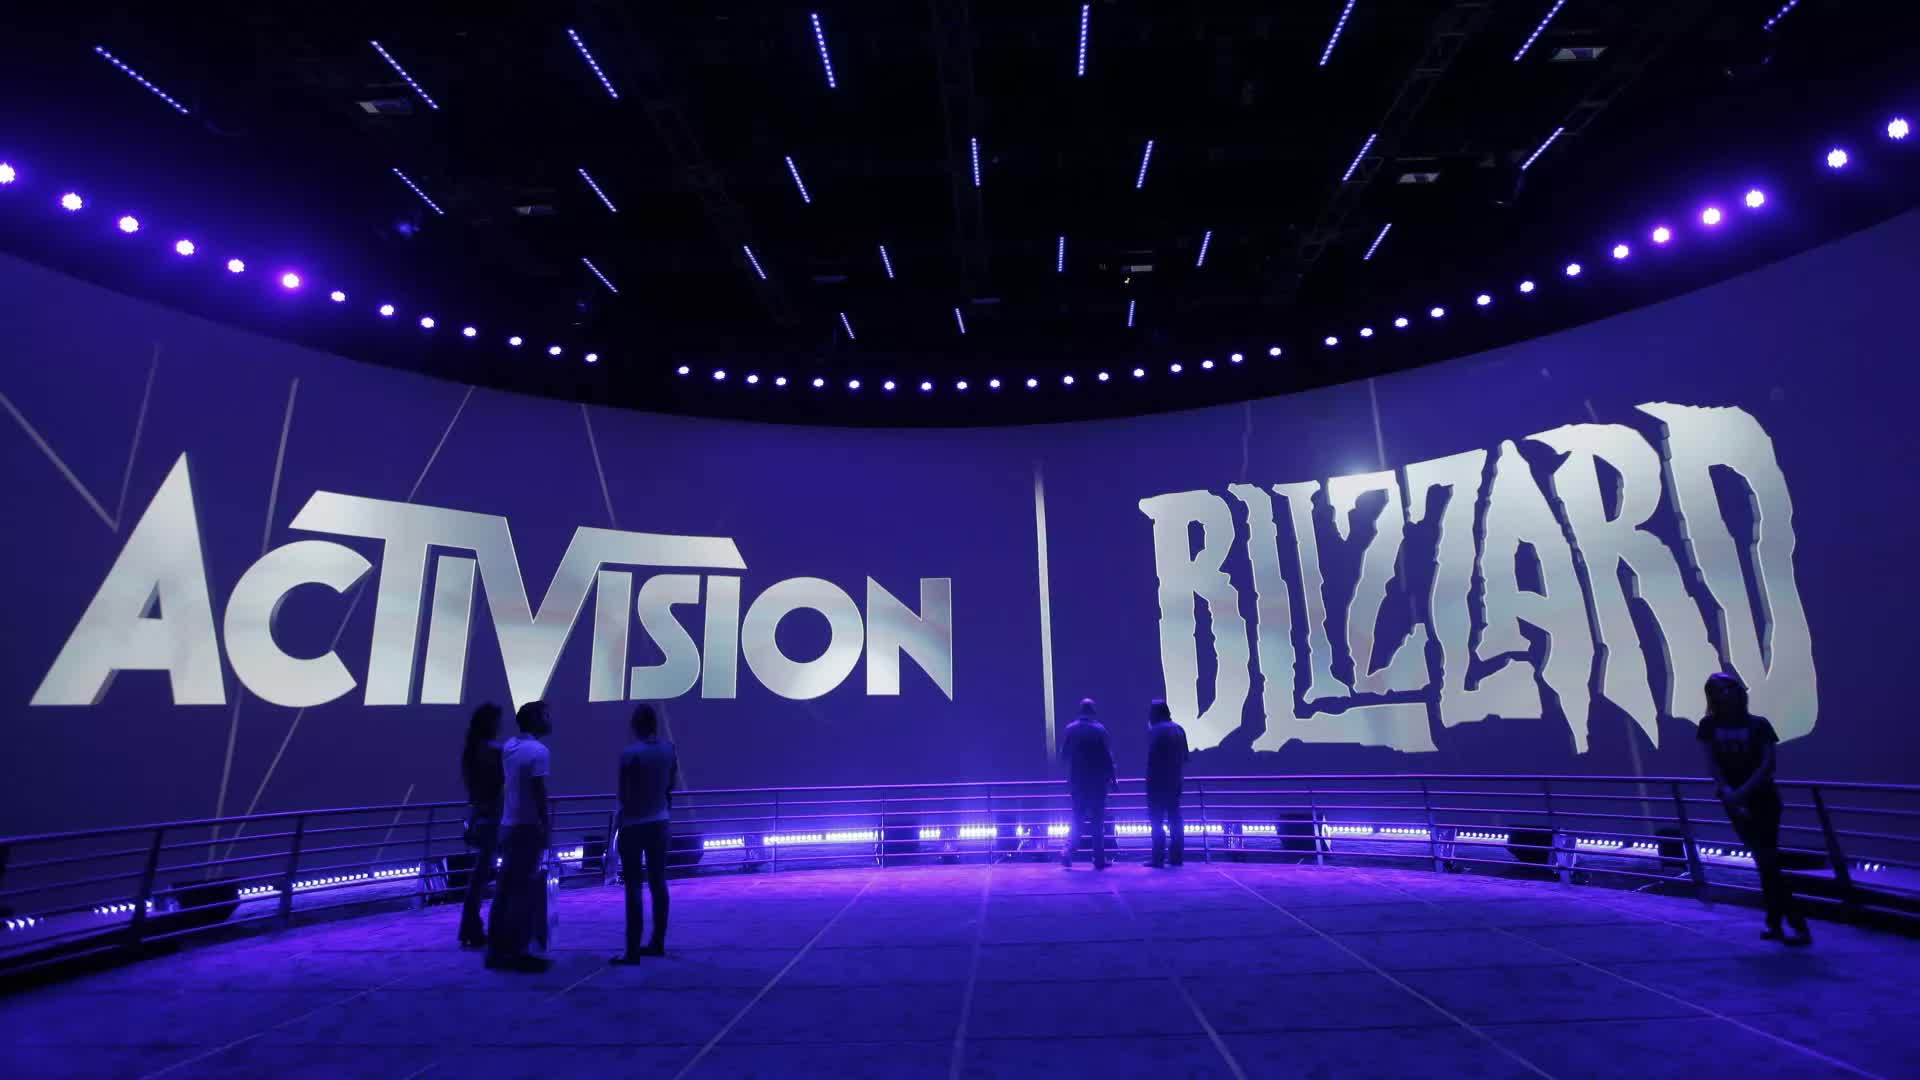 Activision Blizzard workers go on strike, seek donations for wage assistance